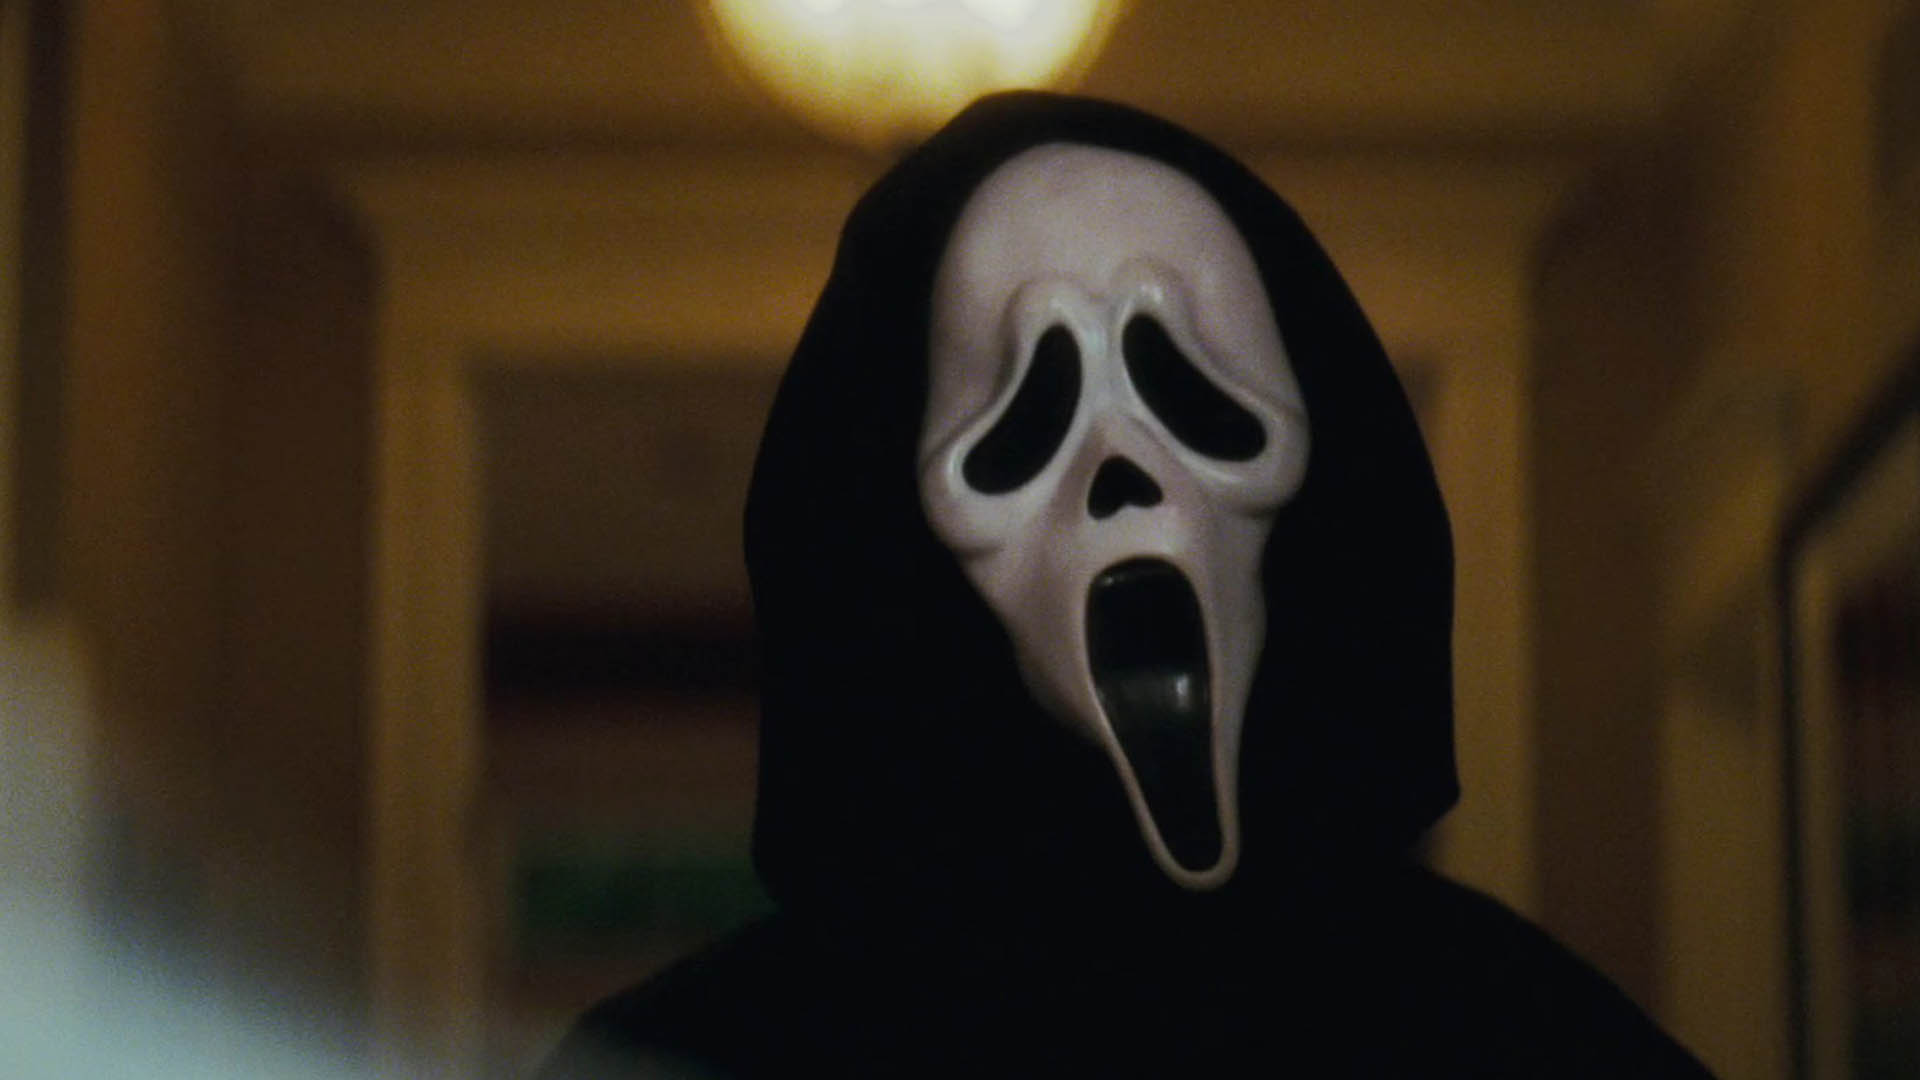 The evil character of the Scream movie series with a white mask